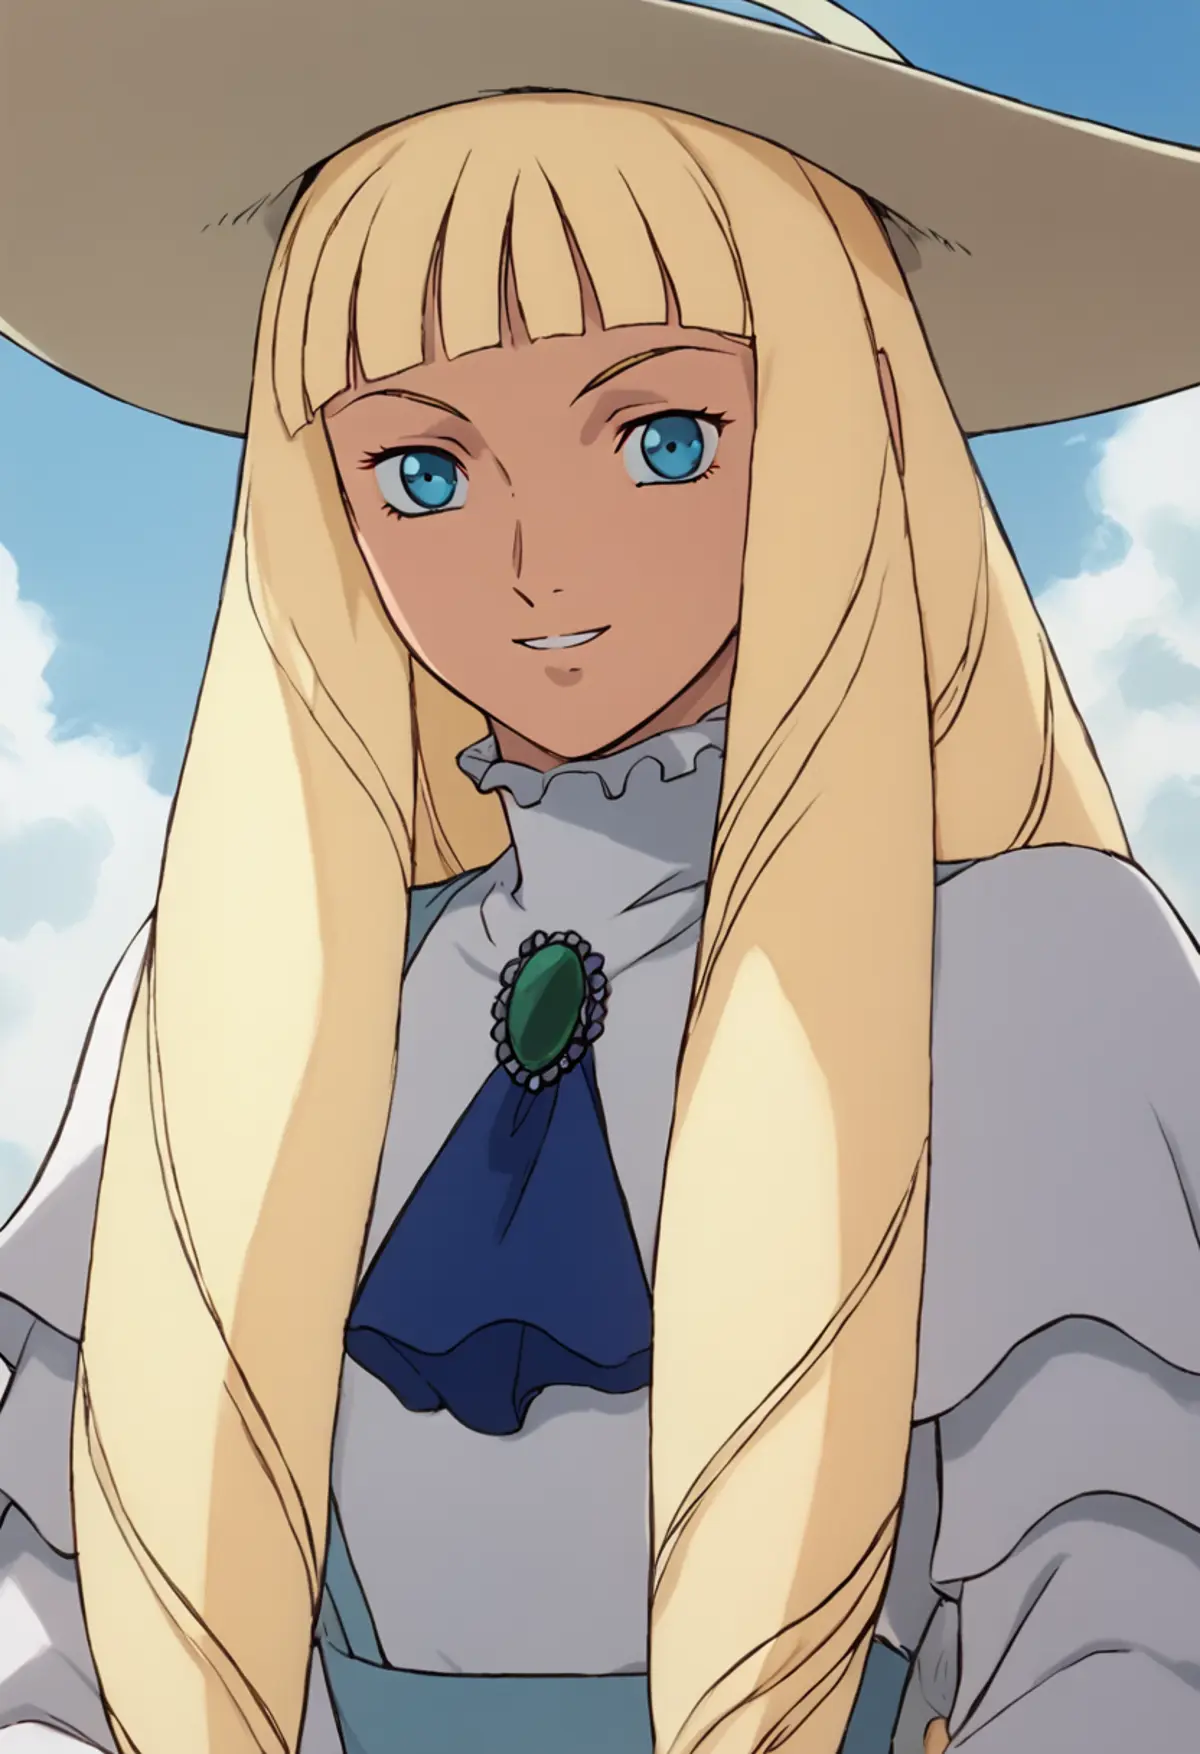 A young woman with elegantly styled long blonde hair wearing a wide-brimmed hat. She is wearing an elaborate high collared shirt embellished with a large green brooch, adding a touch of color to the character’s light-colored outfit. The backdrop is a clear blue sky dotted with fluffy white clouds.